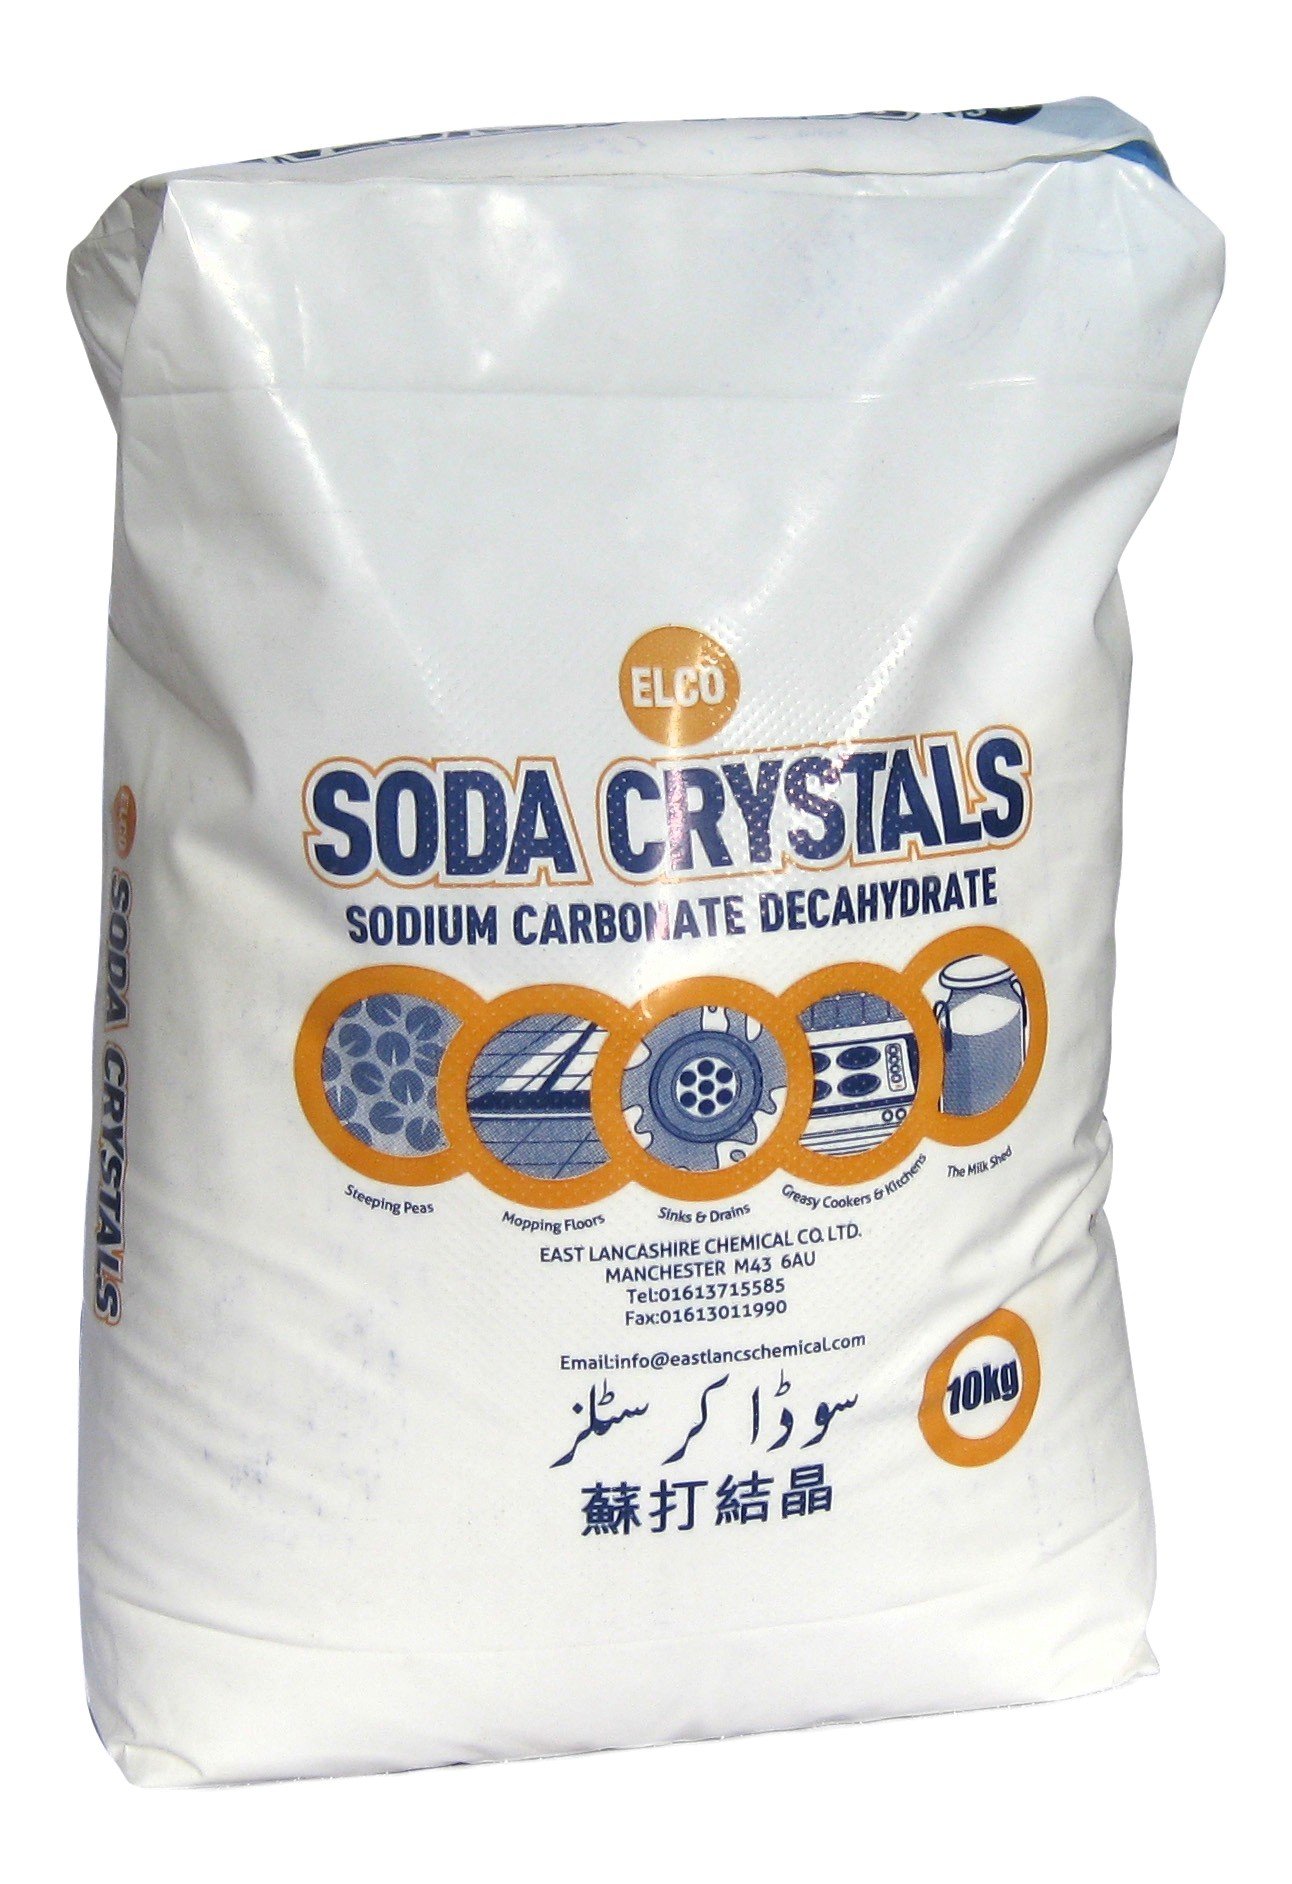 Picture of 10kg bag of ELCO Soda Crystals